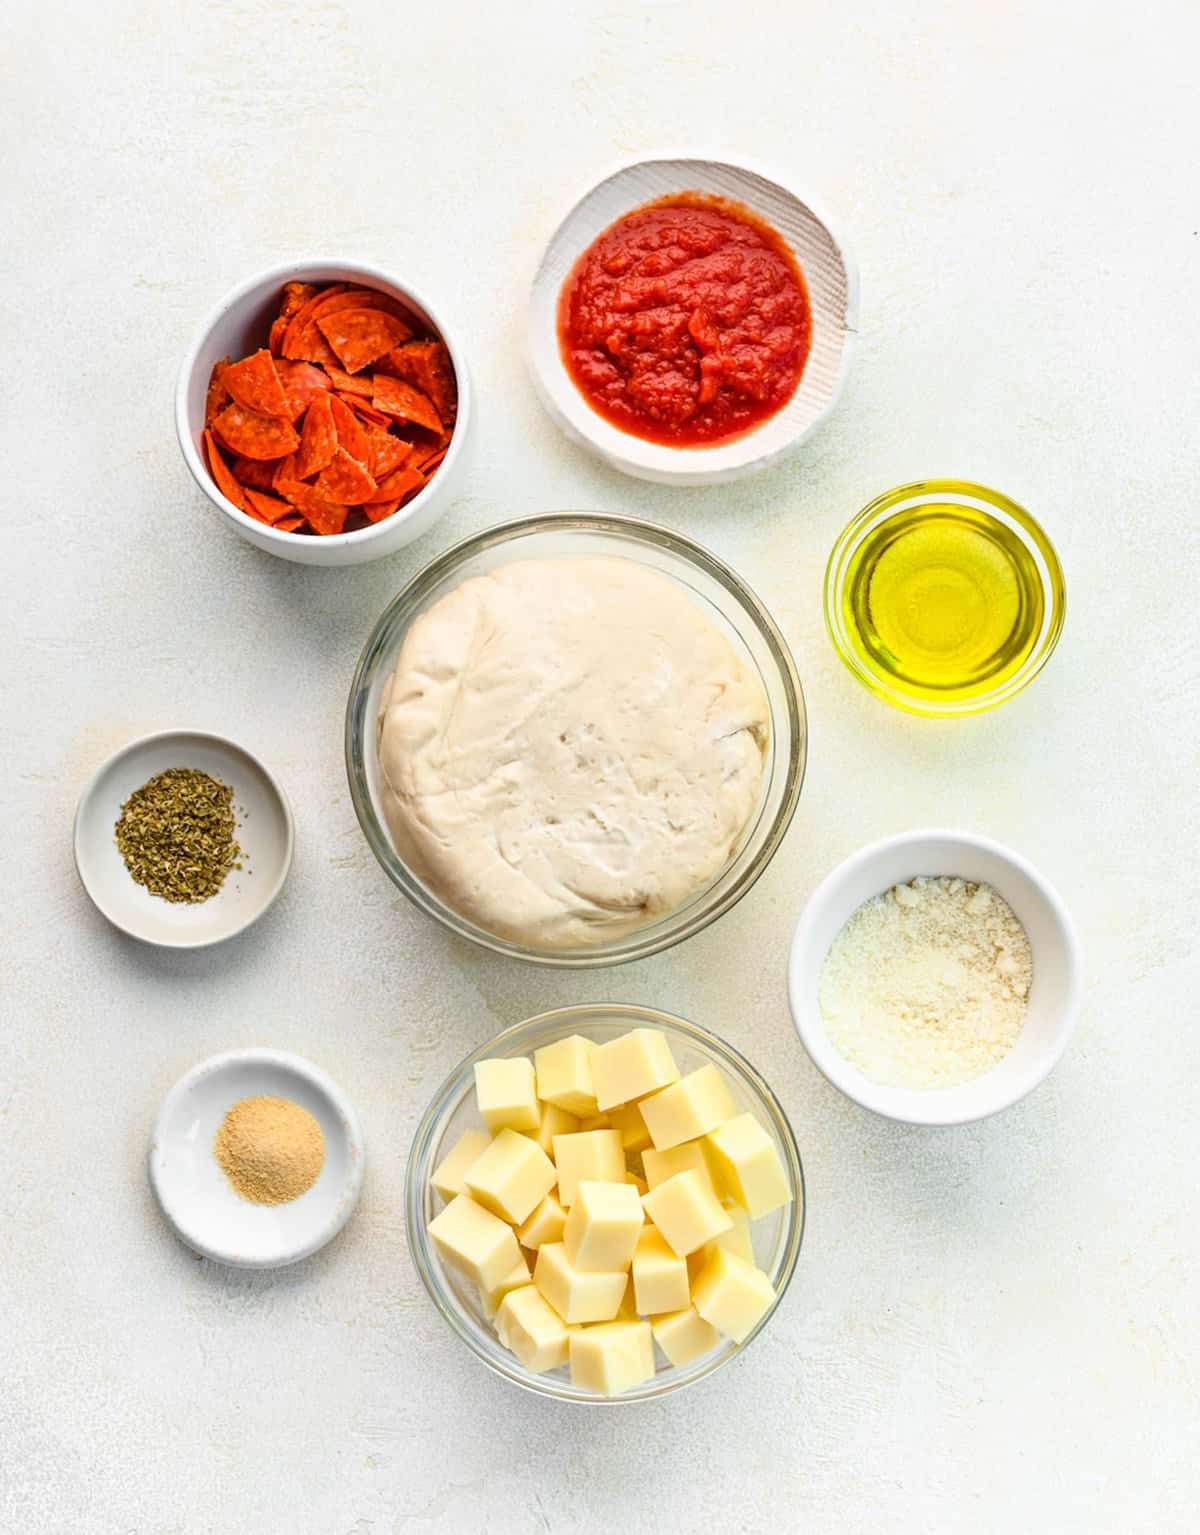 Ingredients for pizza bites separated into bowls.